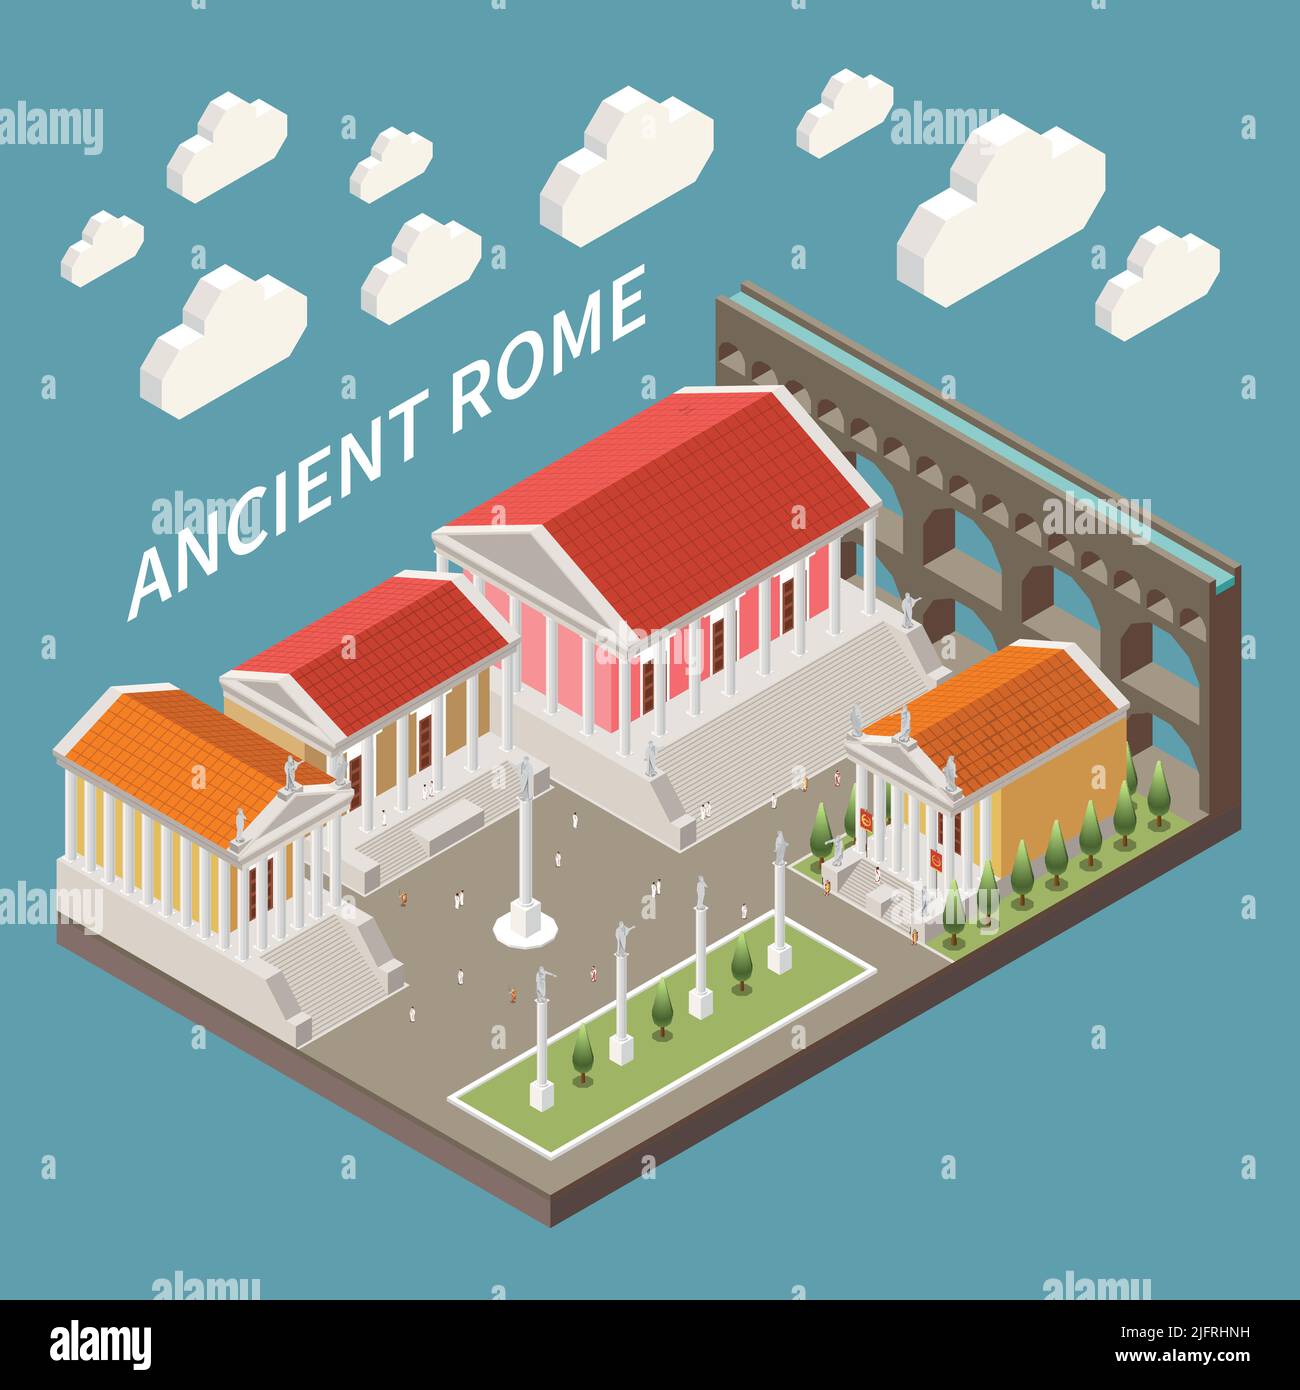 Ancient Rome concept with historic architecture symbols isometric vector illustration Stock Vector